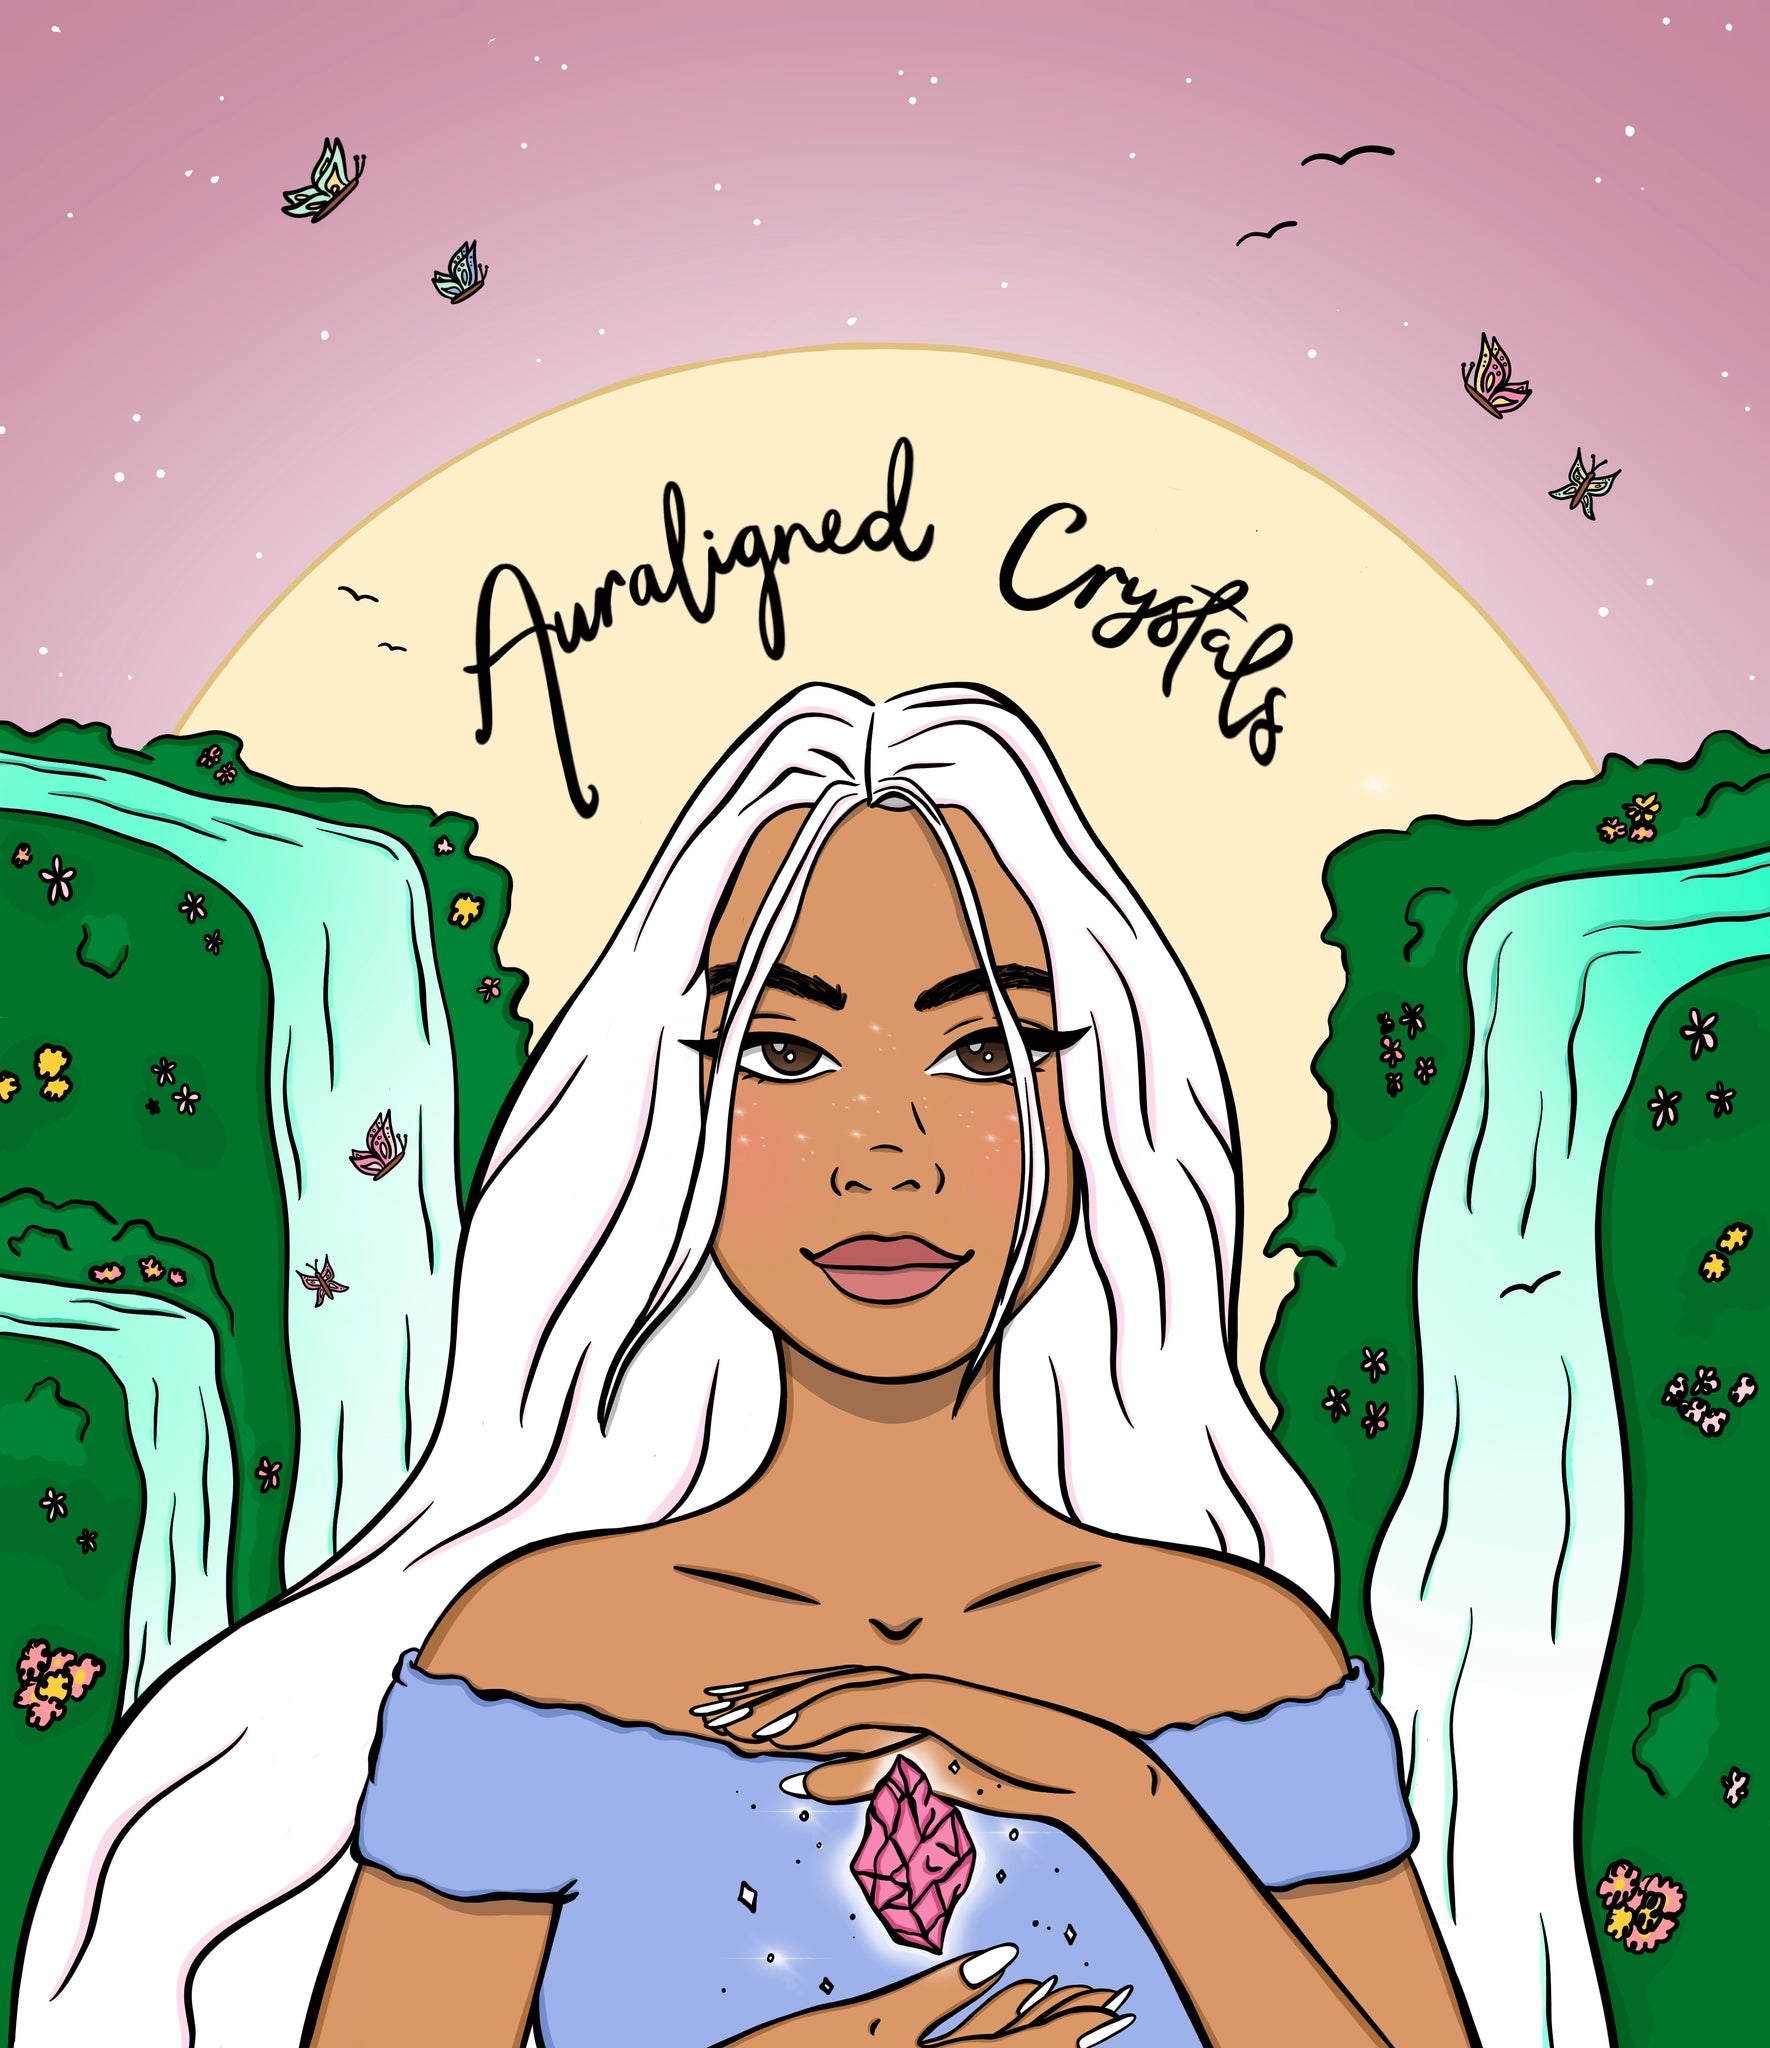 logo of auraligned crystals shows pink skies with birds and butterflies flying over a bright full moon. Waterfalls are all around in a lush garden filled with flowers. Filipina woman with long white hair holds a pink crystal in between her hands.